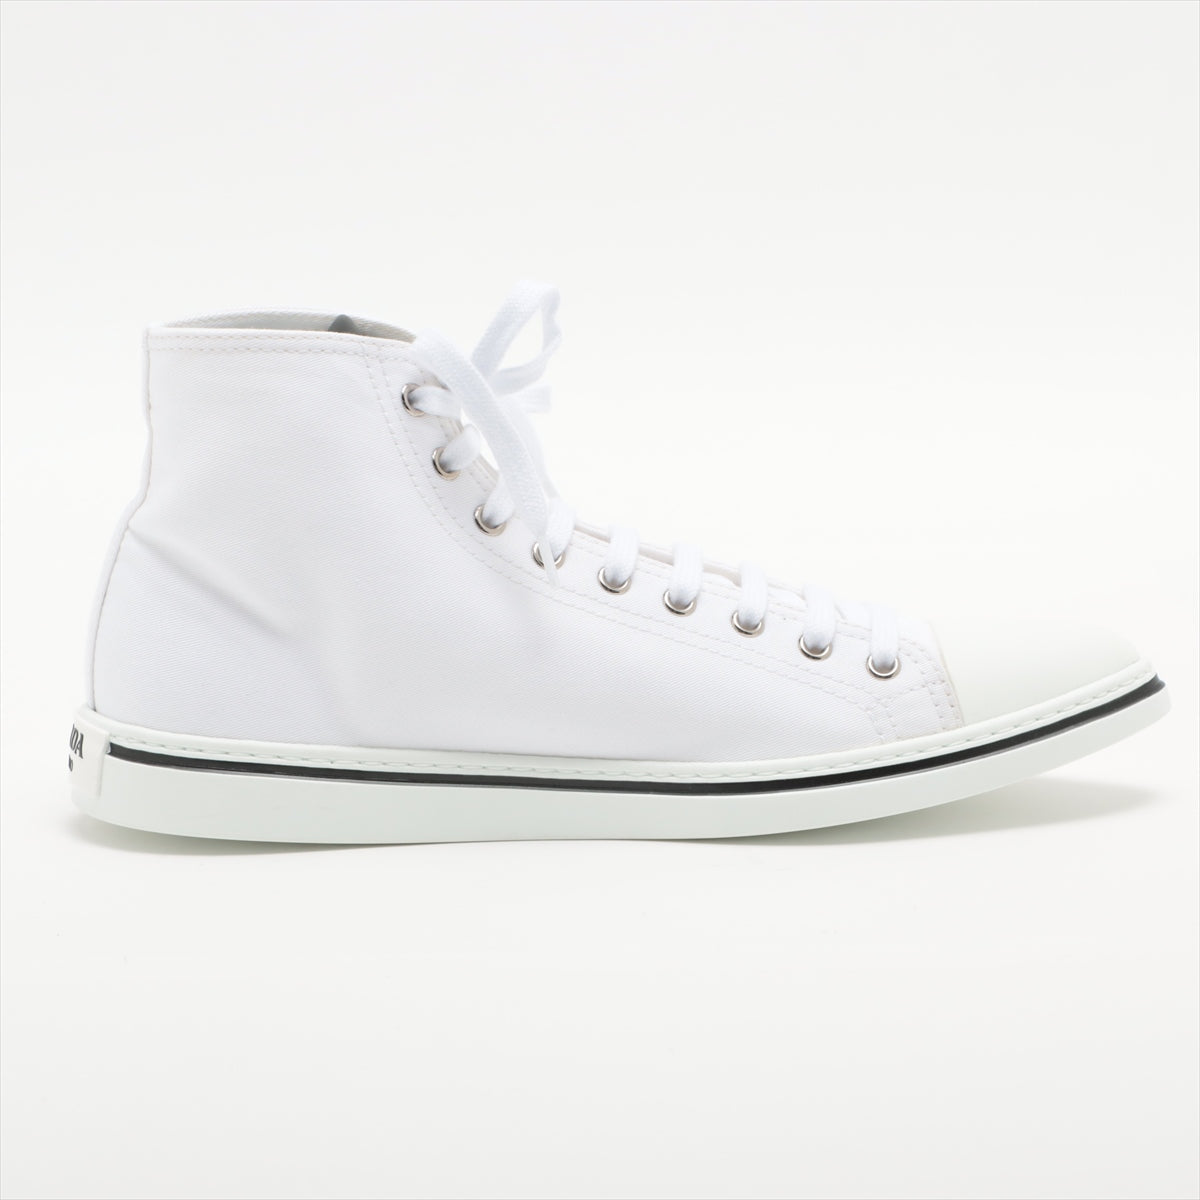 Prada canvas High-top Sneakers 6 1/2 Men's White 2TG177 Pointed toe